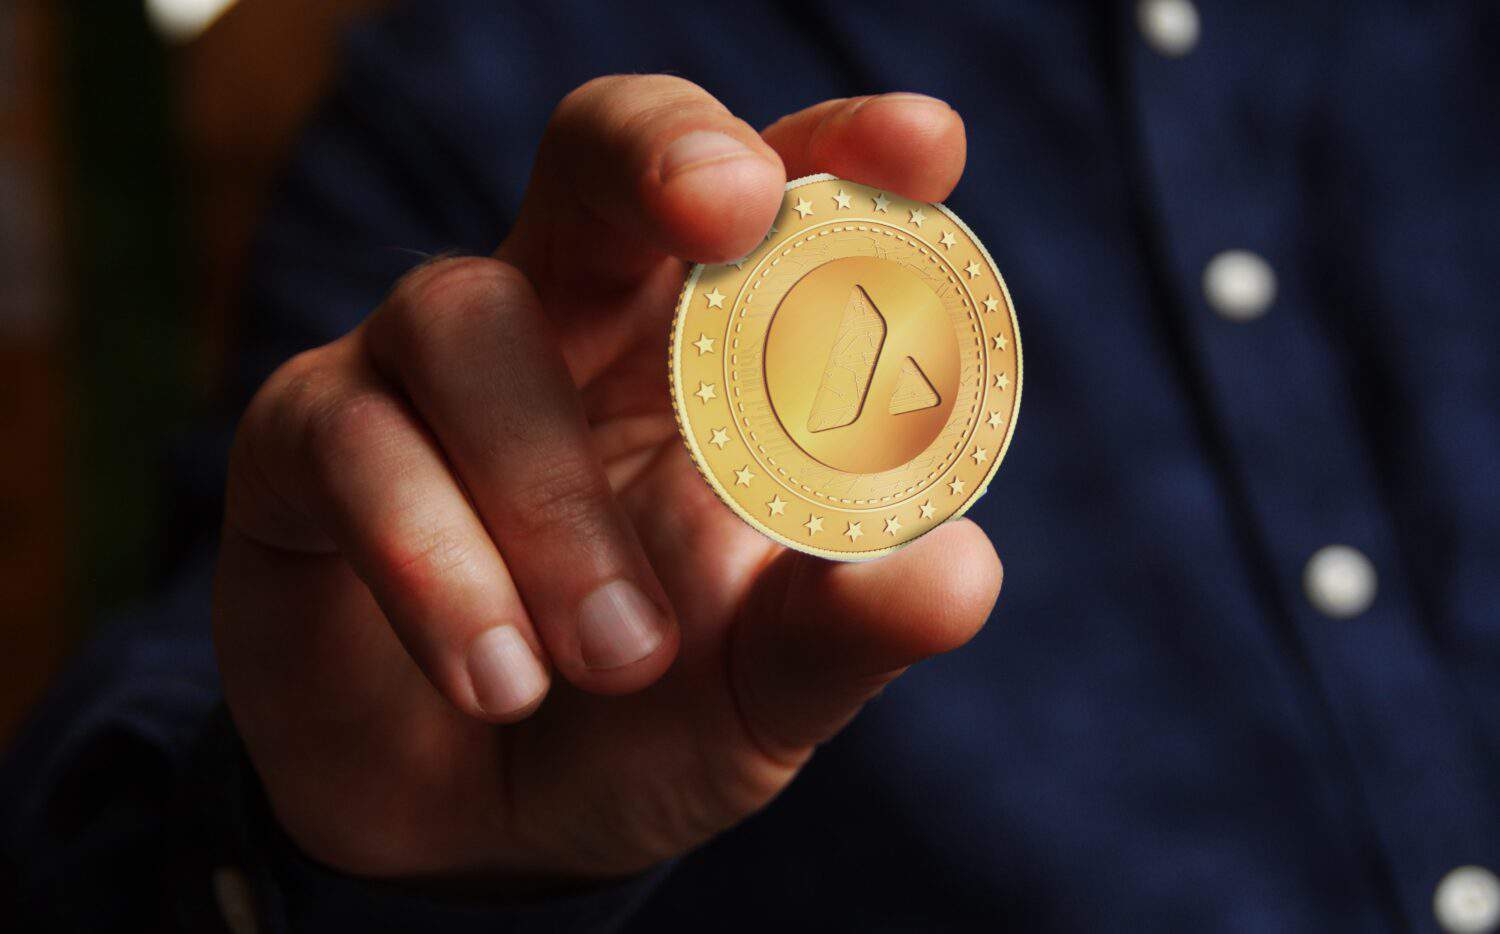 Avalanche AVAX cryptocurrency symbol golden coin in hand abstract concept.